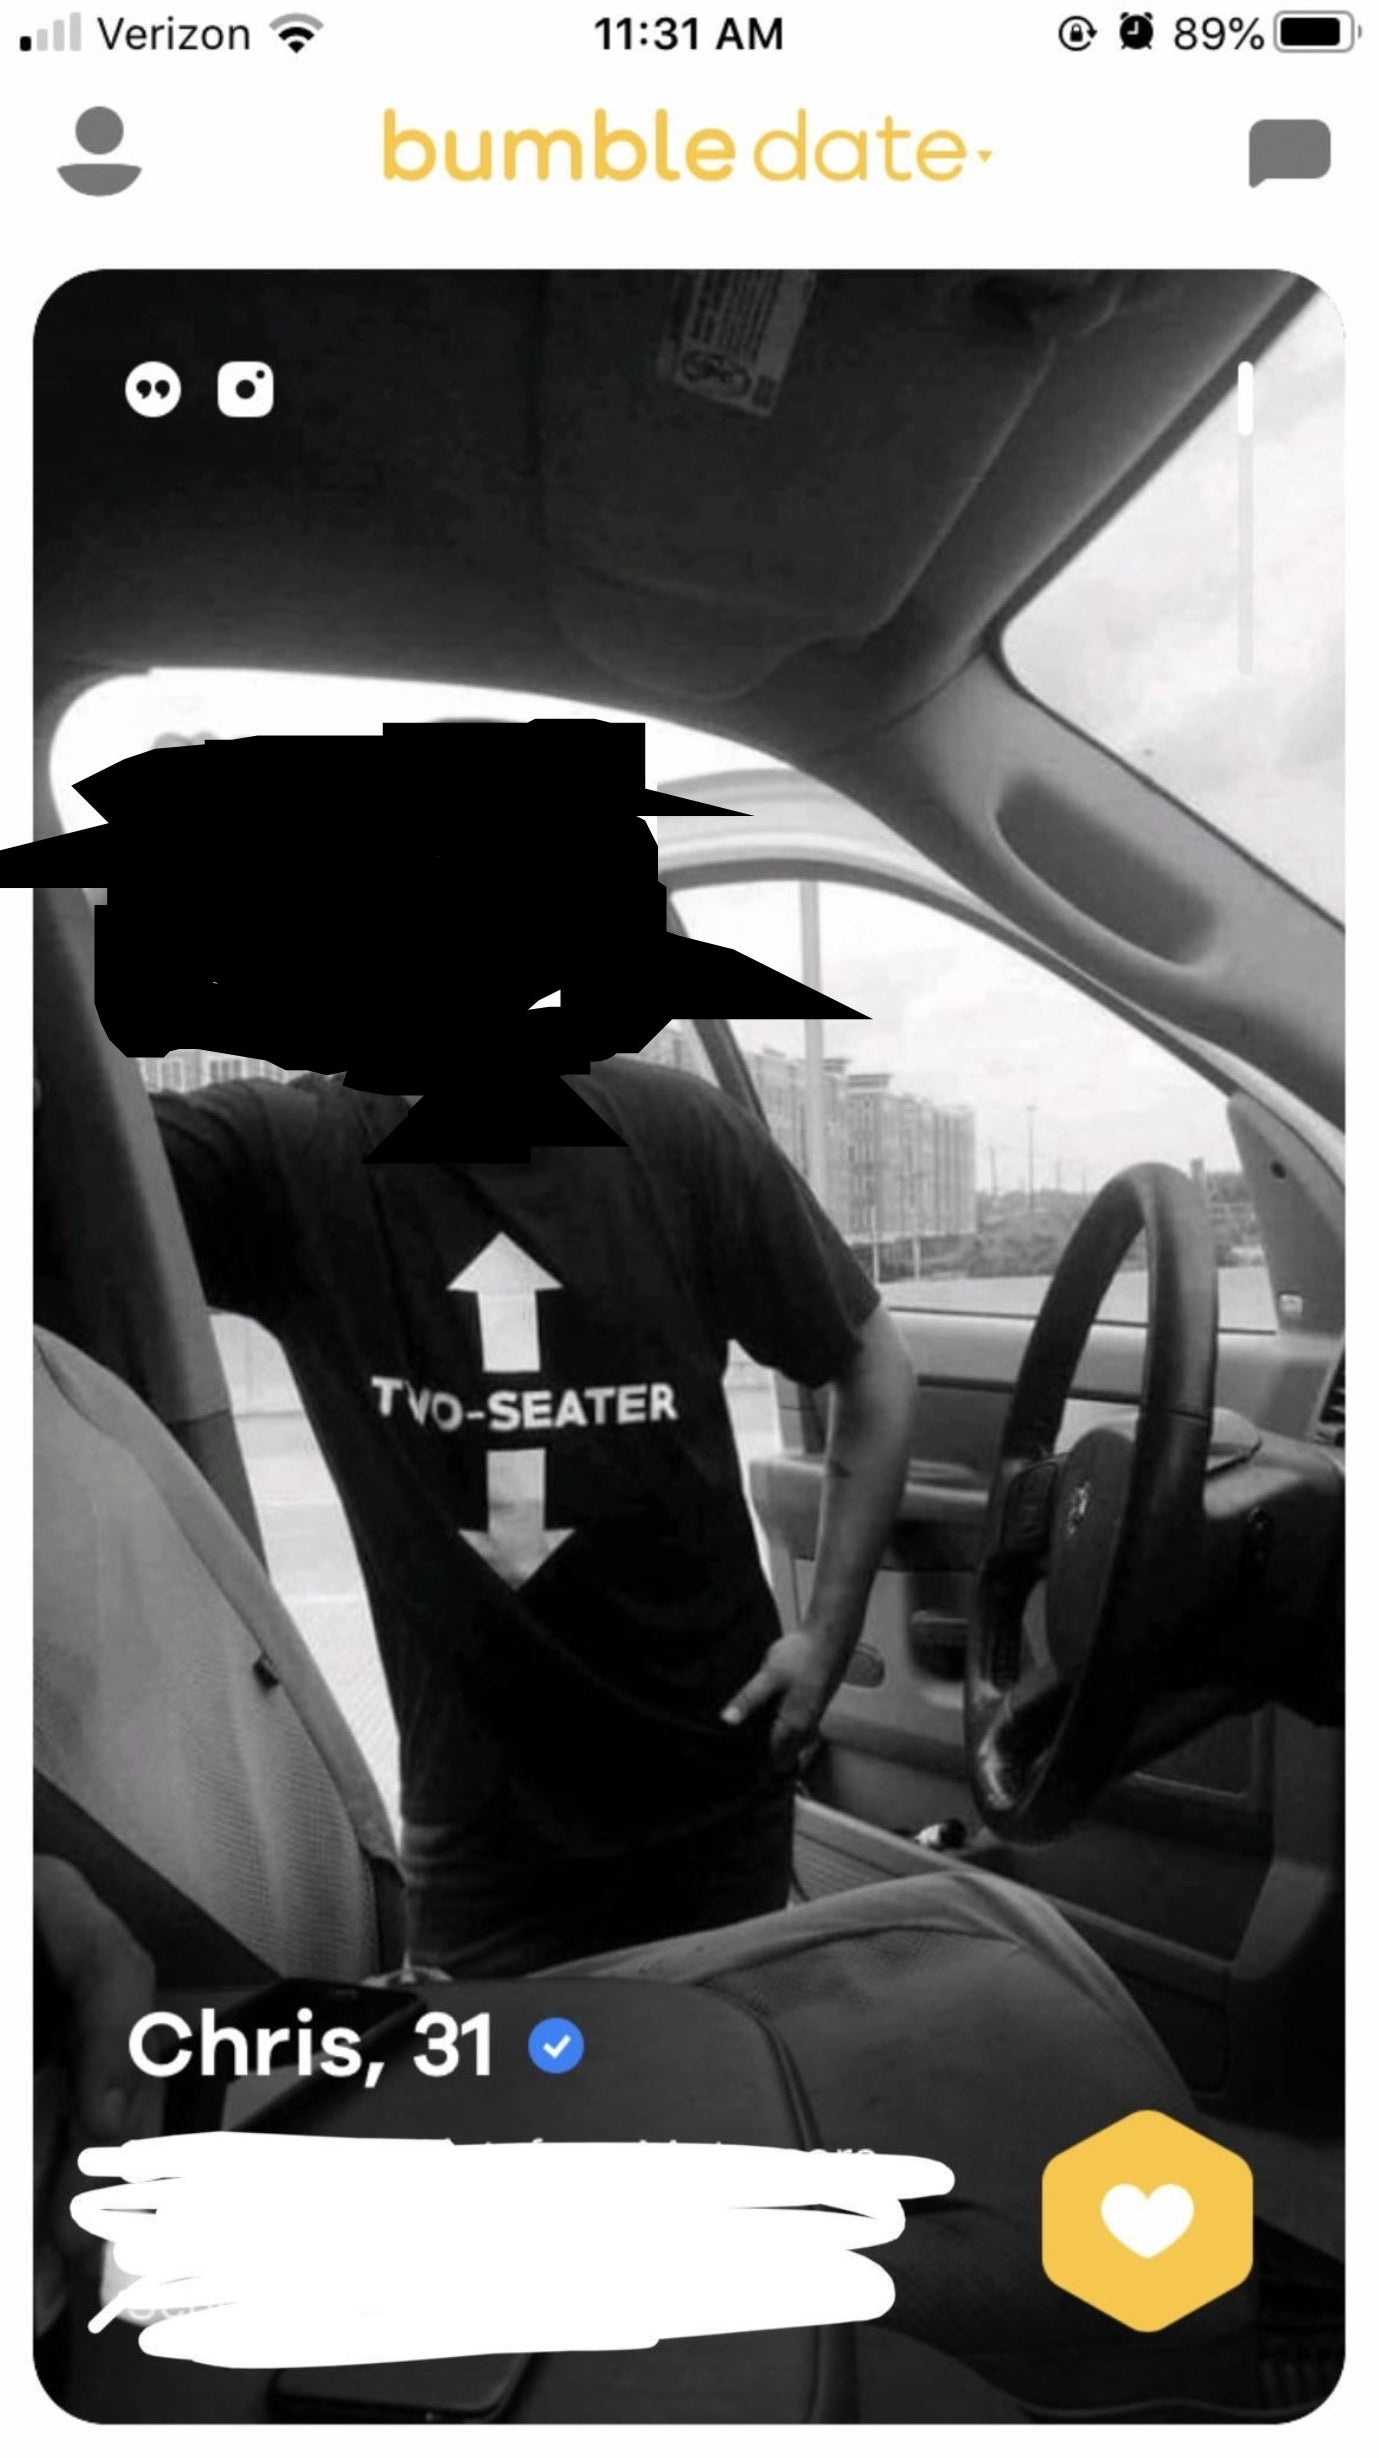 A guy wearing a shirt that says &quot;two-seater&quot; with arrows pointing down and up